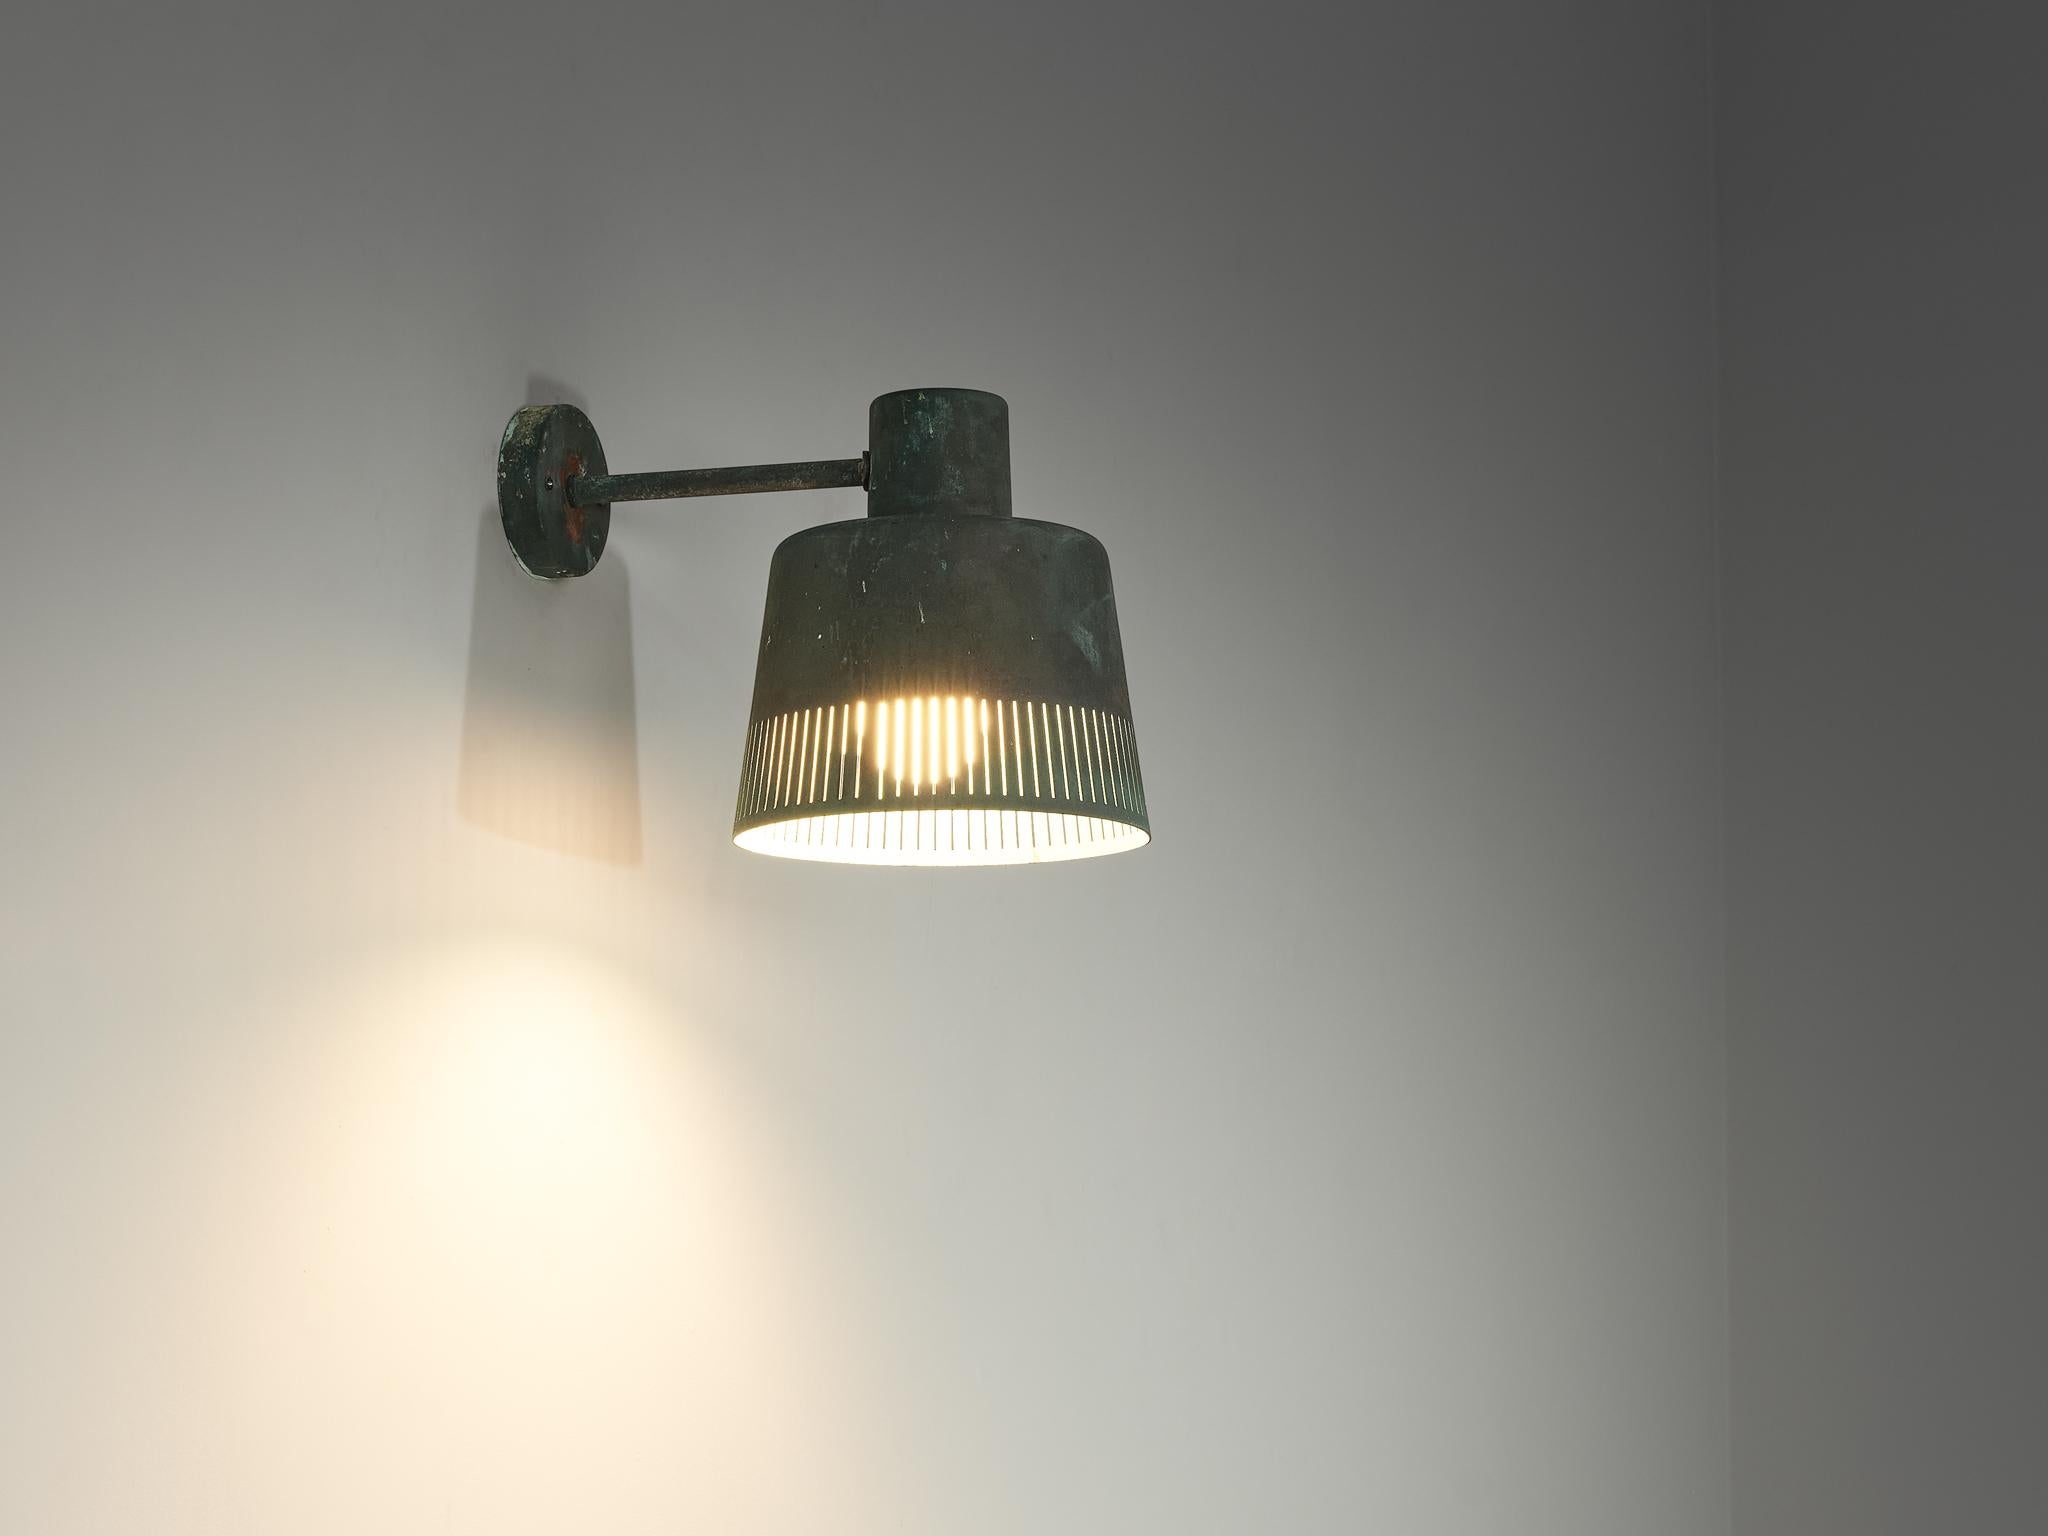 Hans Bergström for Ateljé Lyktan, wall lamp, model '1006A', patinated copper, Sweden, 1940s

Swedish designer Hans Bergström designed this wall light in the 1940s. As for the material Bergström chose copper that has patinated wonderfully over time.